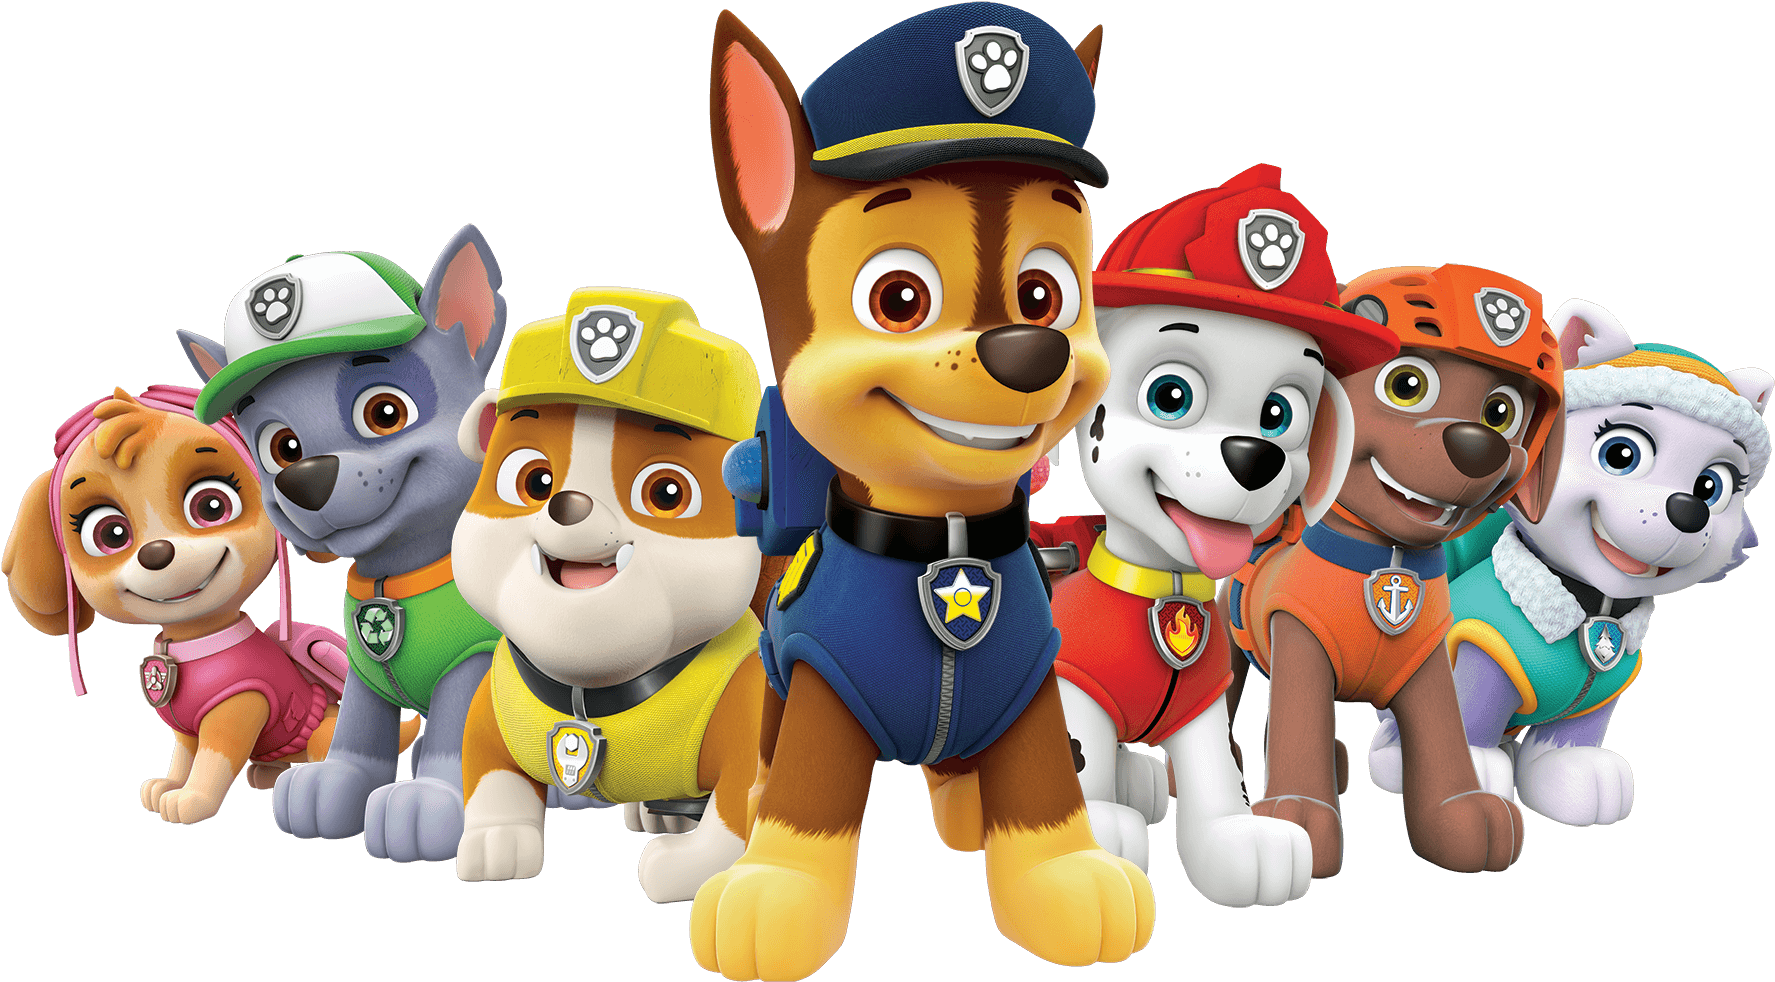 Paw Patrol Clipart - Leapfrog Leapstart Around The Town With Paw Patrol (1800x1008)